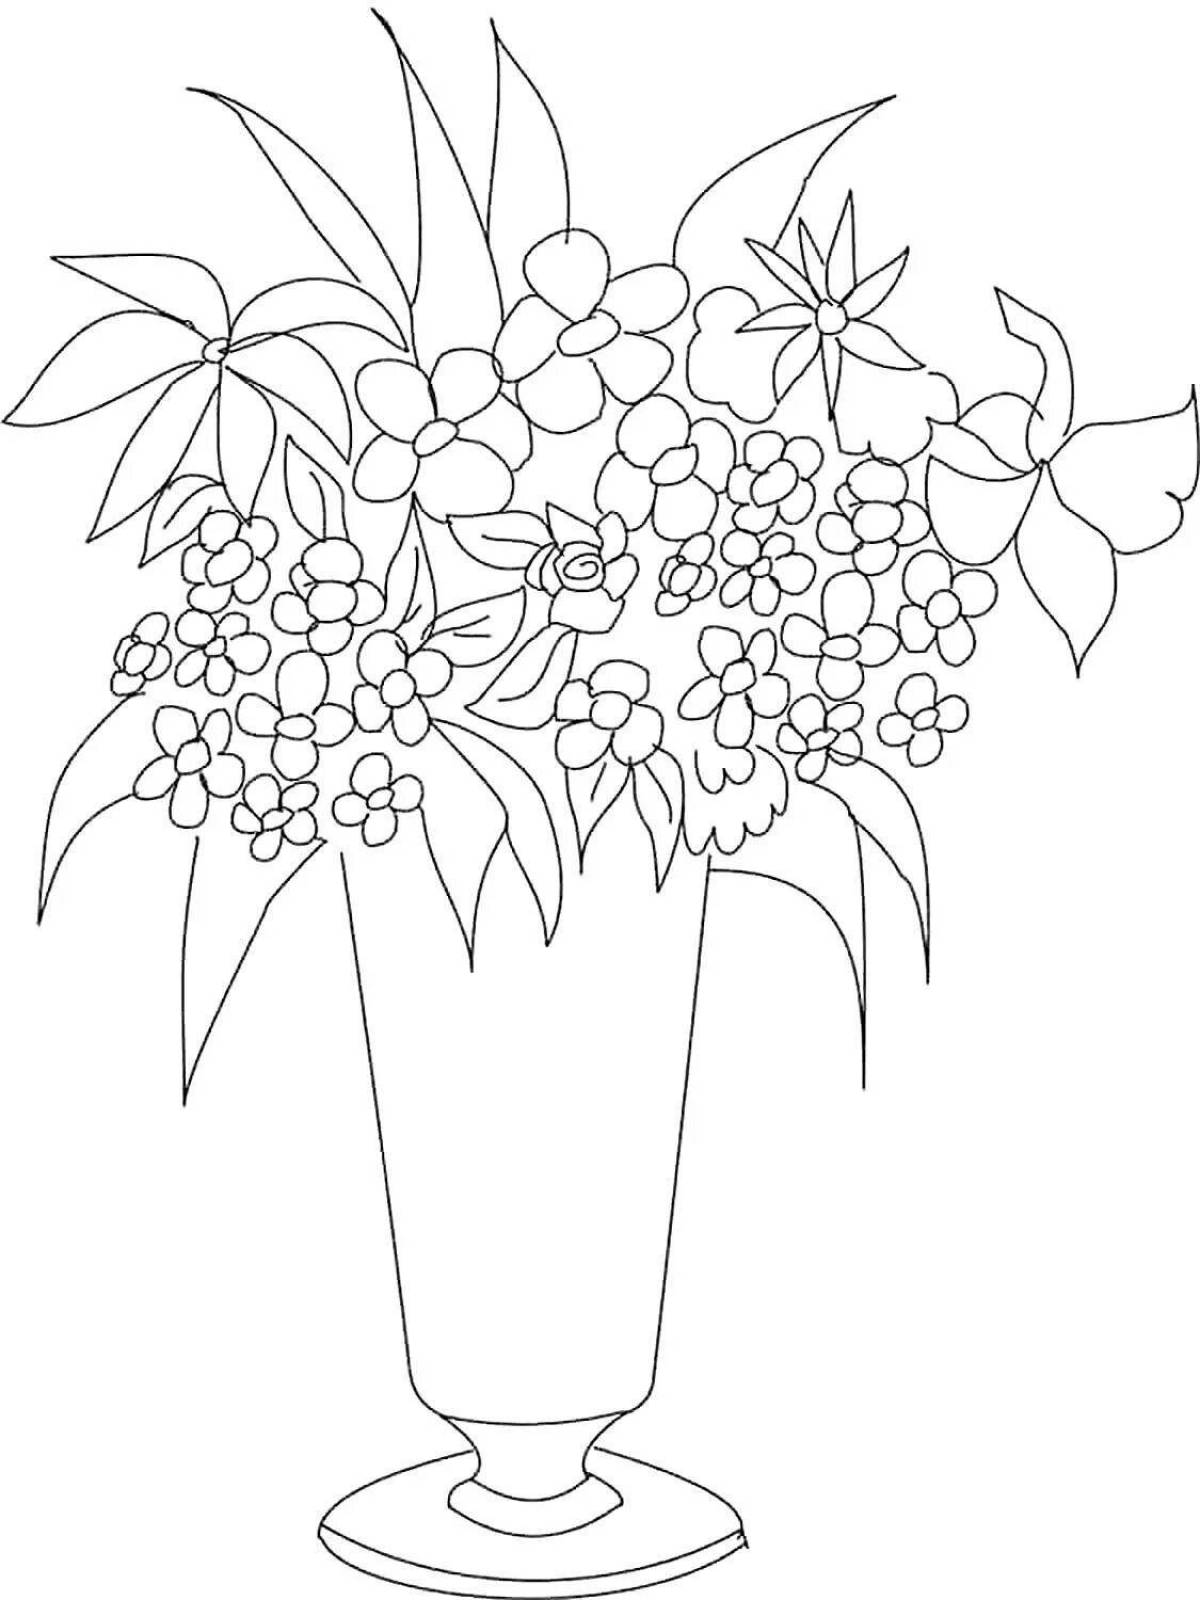 Charming coloring flower in a vase